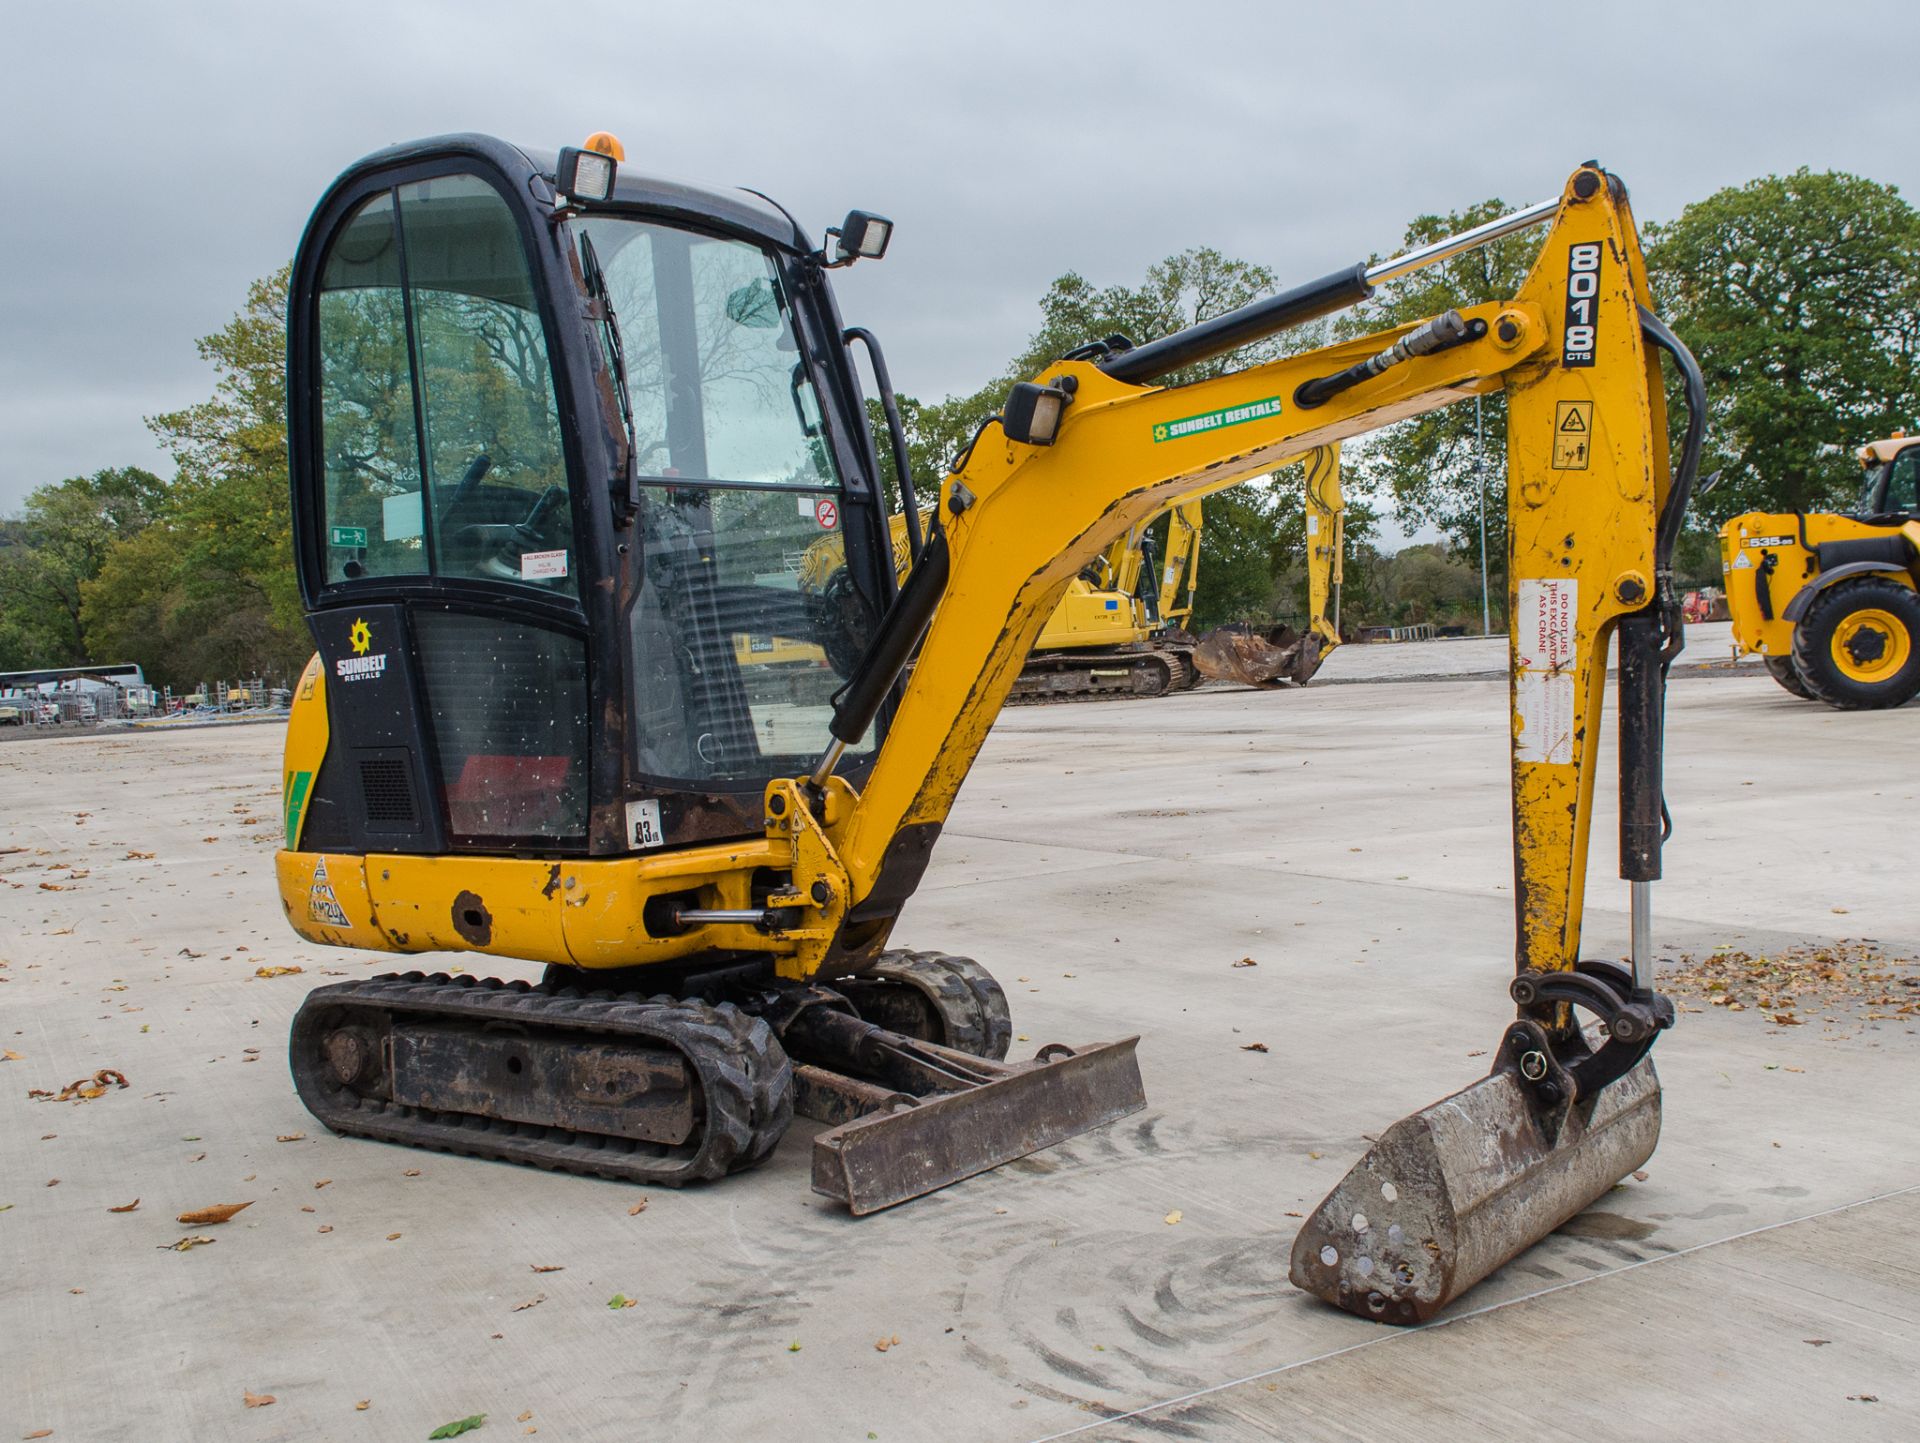 JCB 8018 1.8 tonne rubber tracked mini excavator Year:- 2015 S/N:- 2335056; Recorded hours:- 1987 - Image 2 of 19